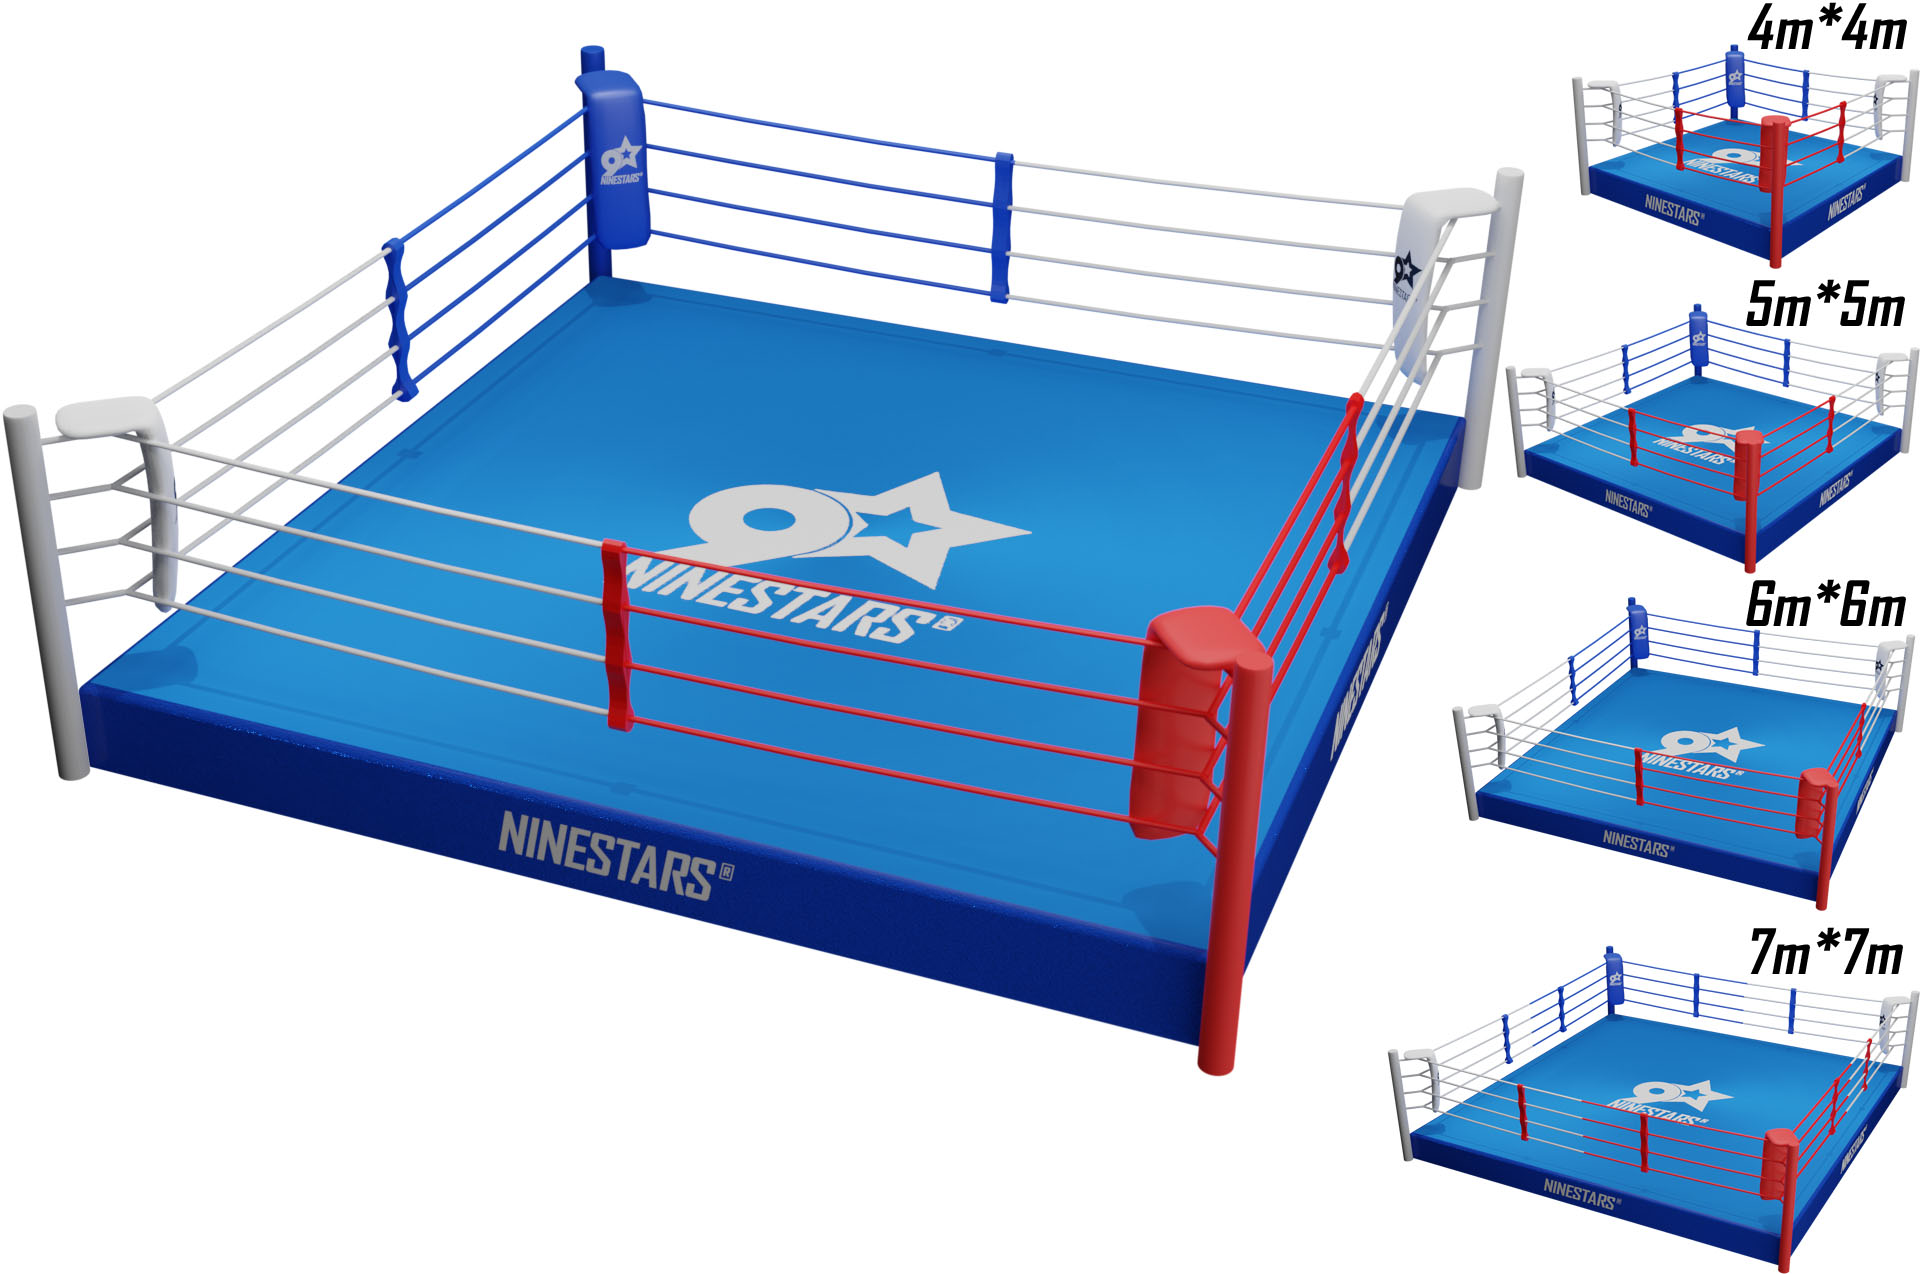 Customize Boxing Ring's Side Canvas size 6x6 m. | Kanongwear.com